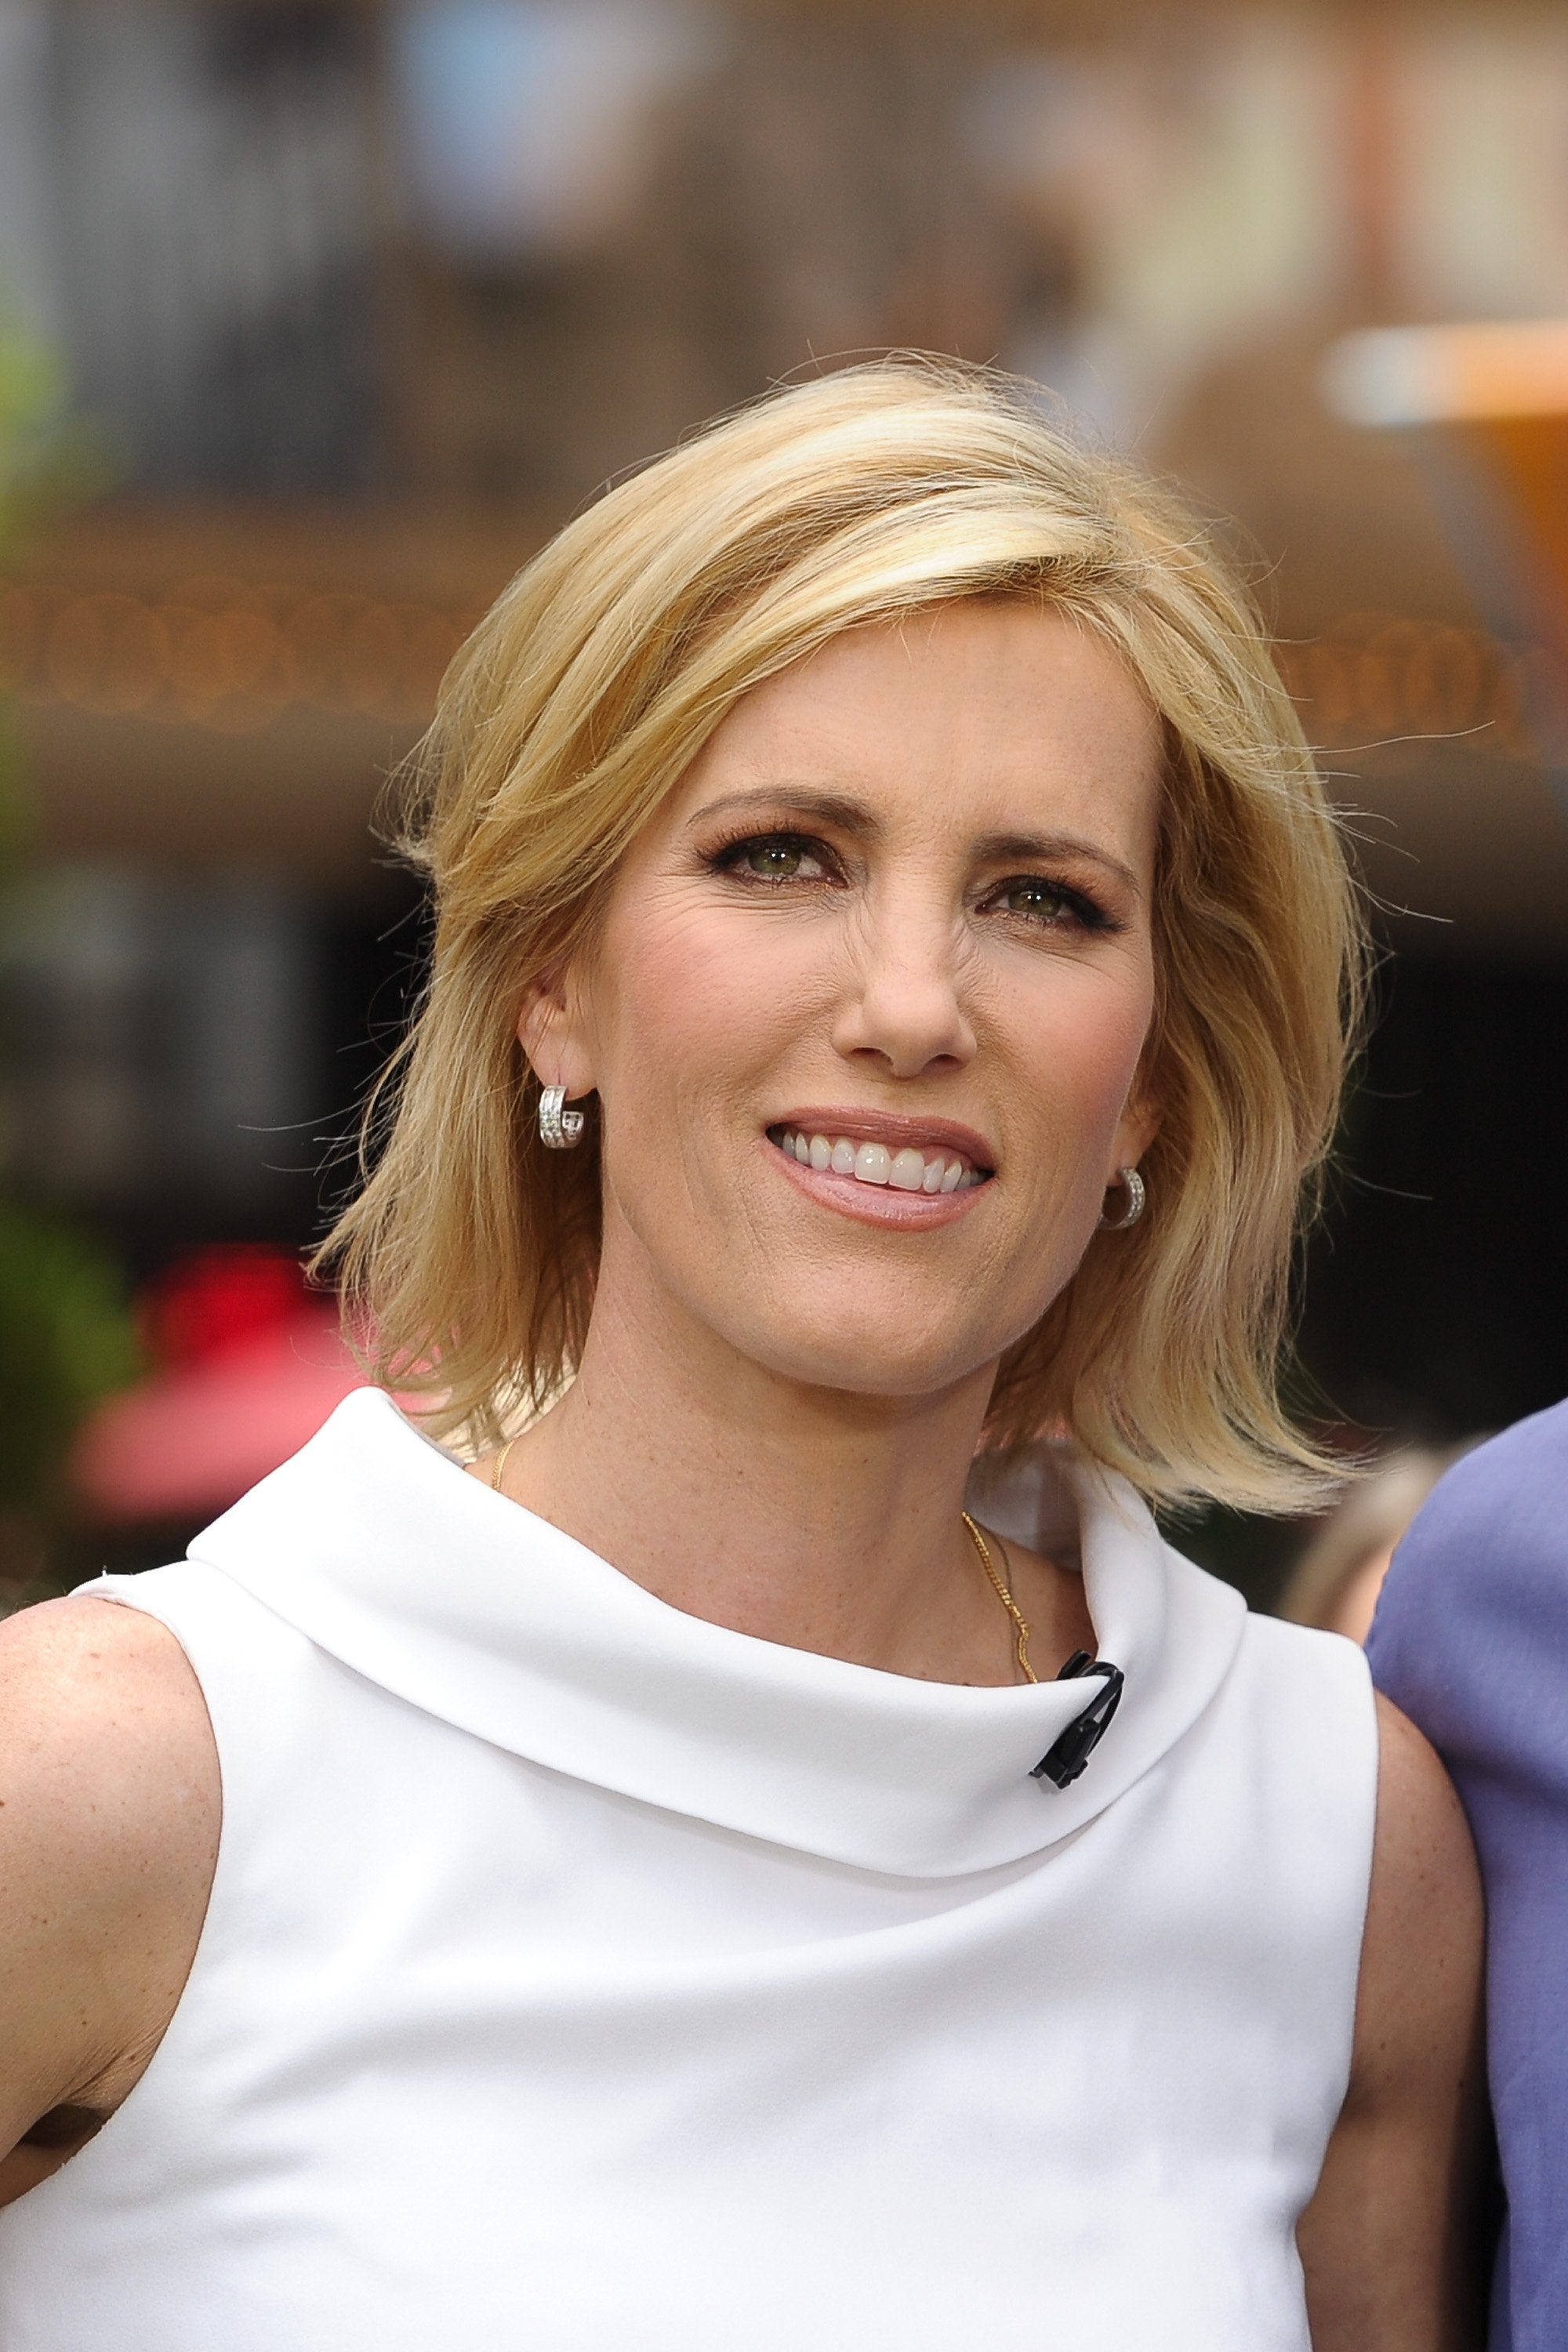  Laura Ingraham at The Grove in 2011 in Los Angeles, California. | Source: Getty Images